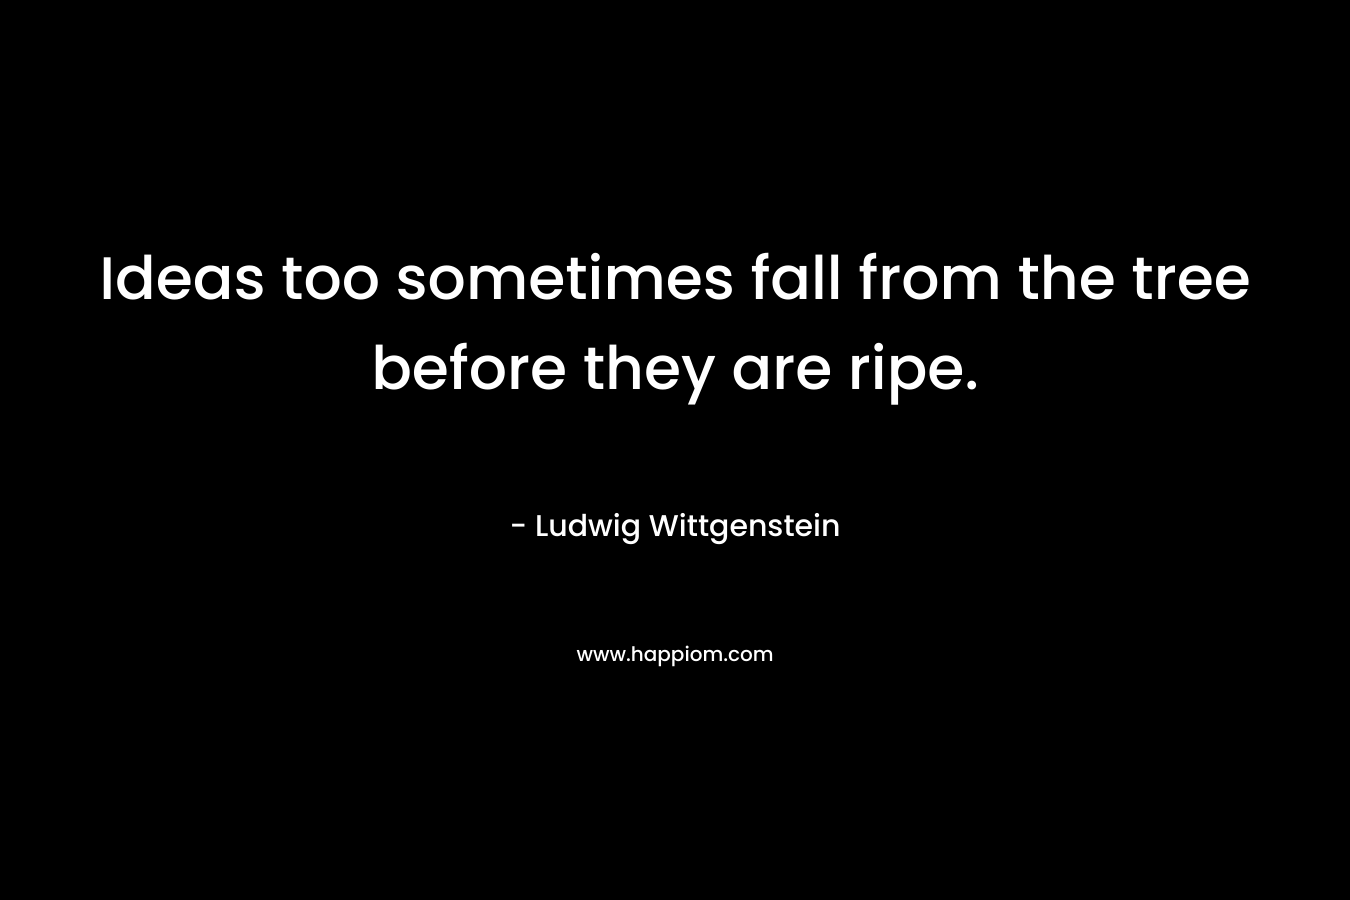 Ideas too sometimes fall from the tree before they are ripe. – Ludwig Wittgenstein